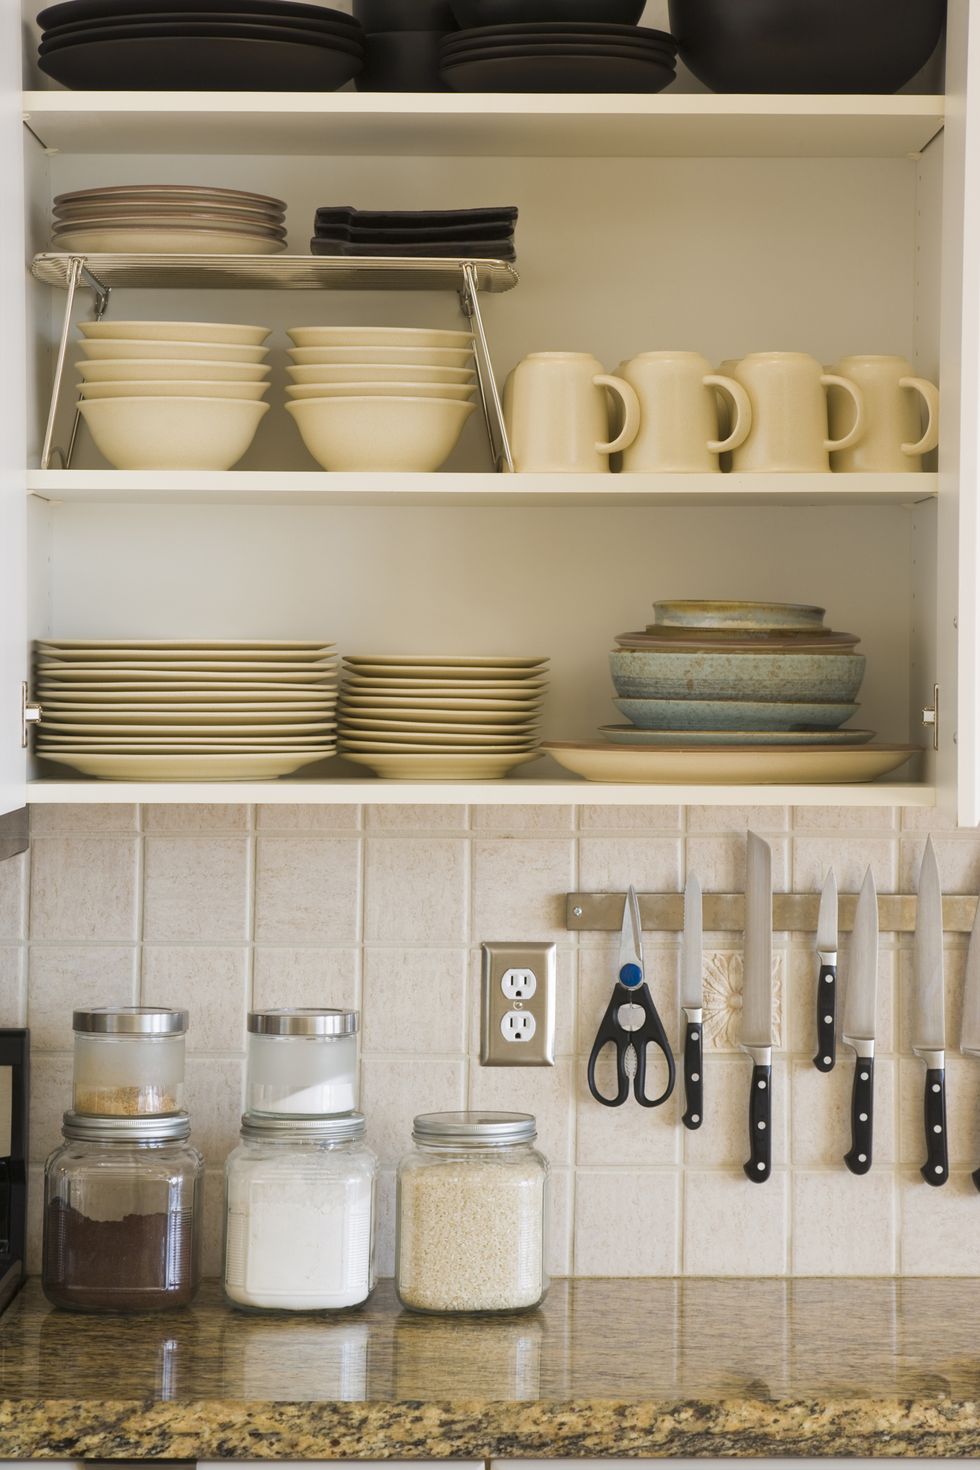 kitchen counter top with open cupboard with stacks of dishes, bowls and cups